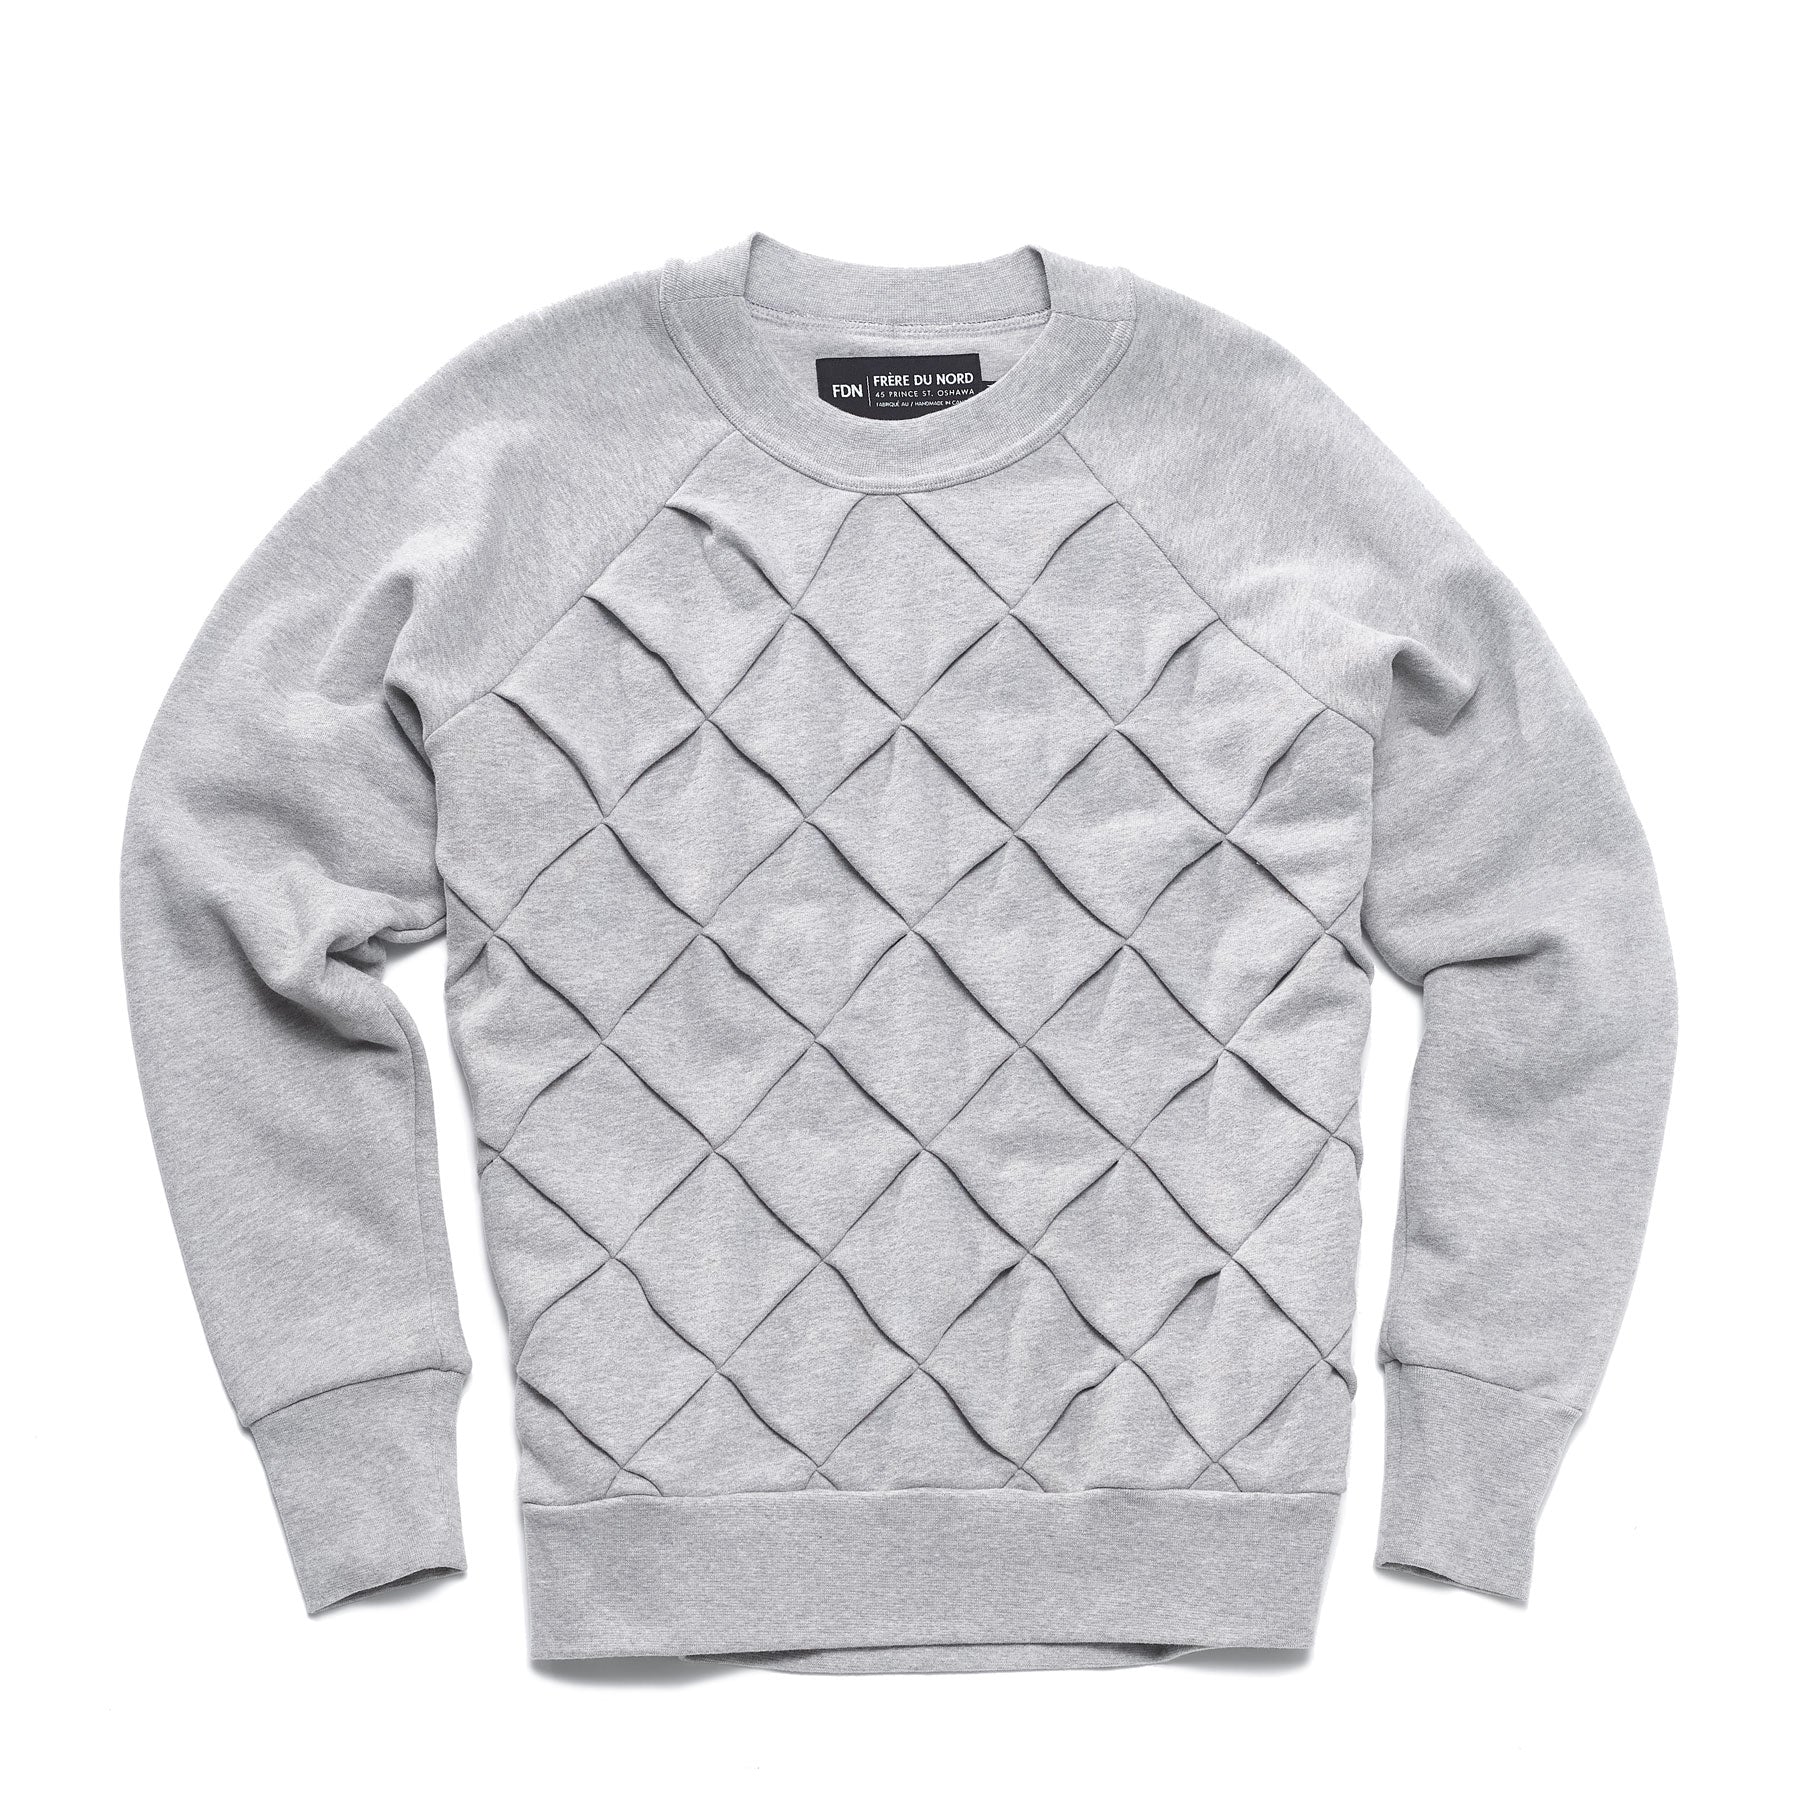 Bowtie Crewneck - Made in Canada - 100% Cotton – FRÈRE DU NORD